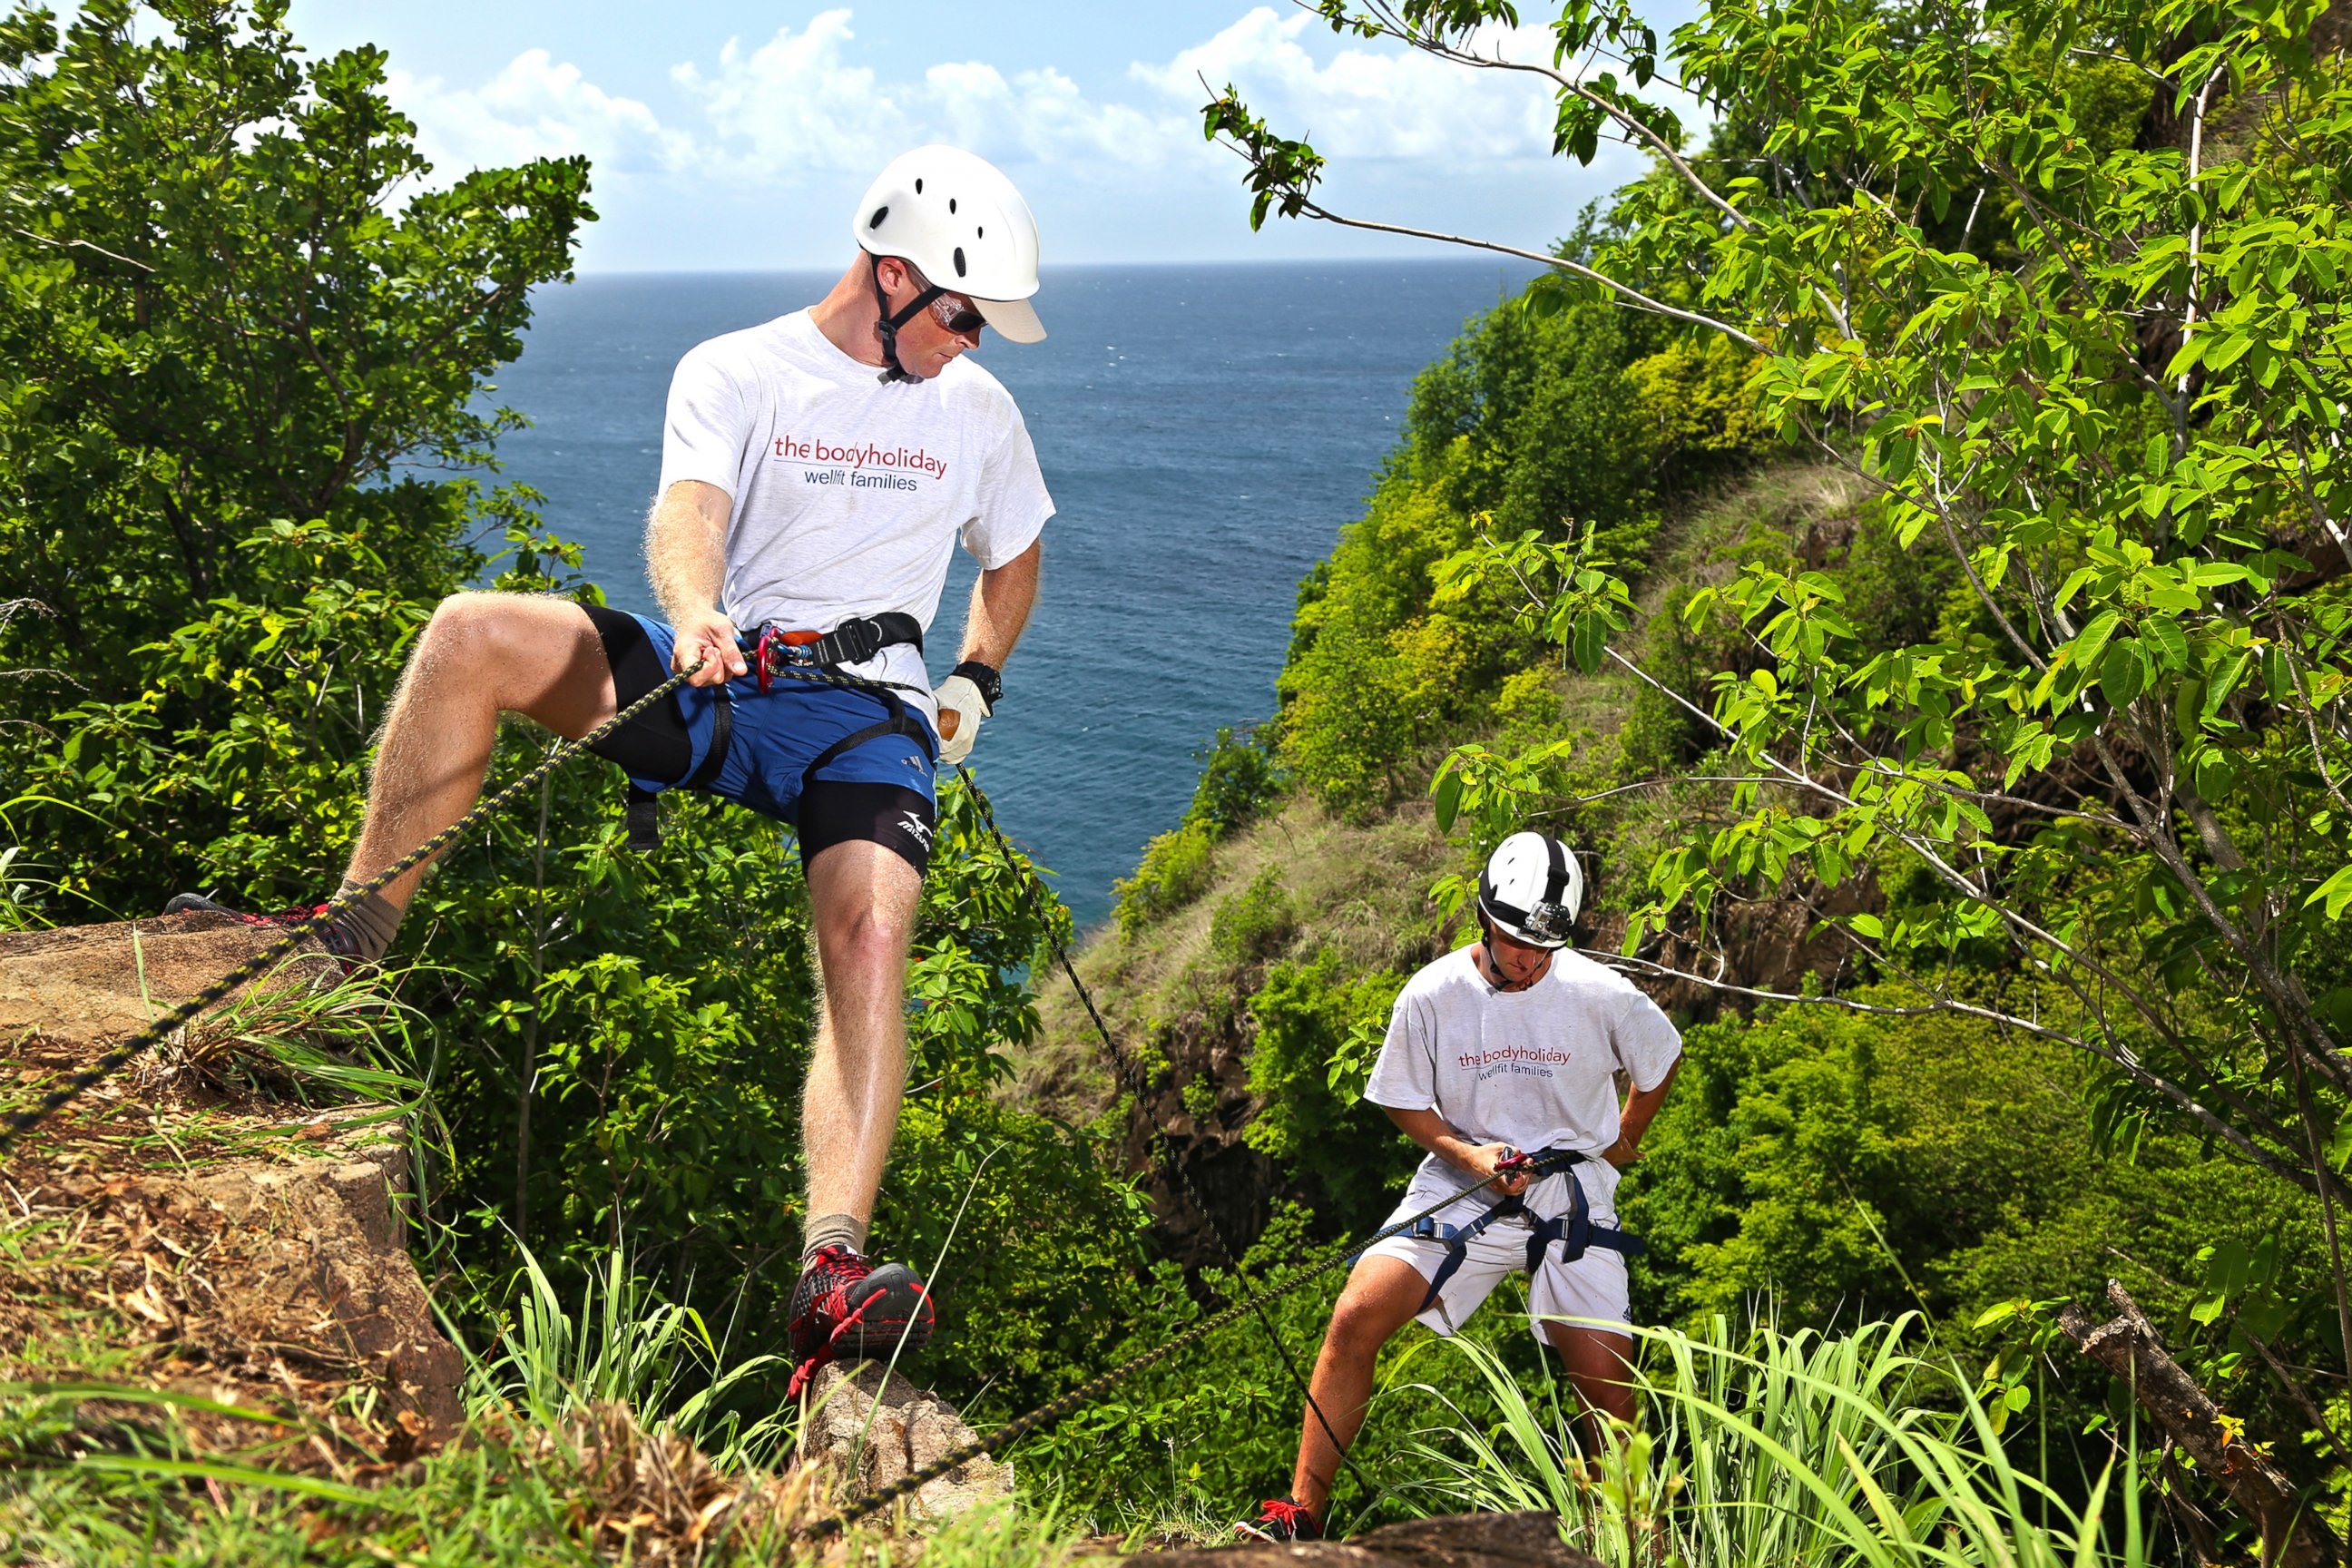 PHOTO: The BodyHoliday in St. Lucia offers a "quadrathlon" to guests, which includes rappelling, as seen in this undated handout image.